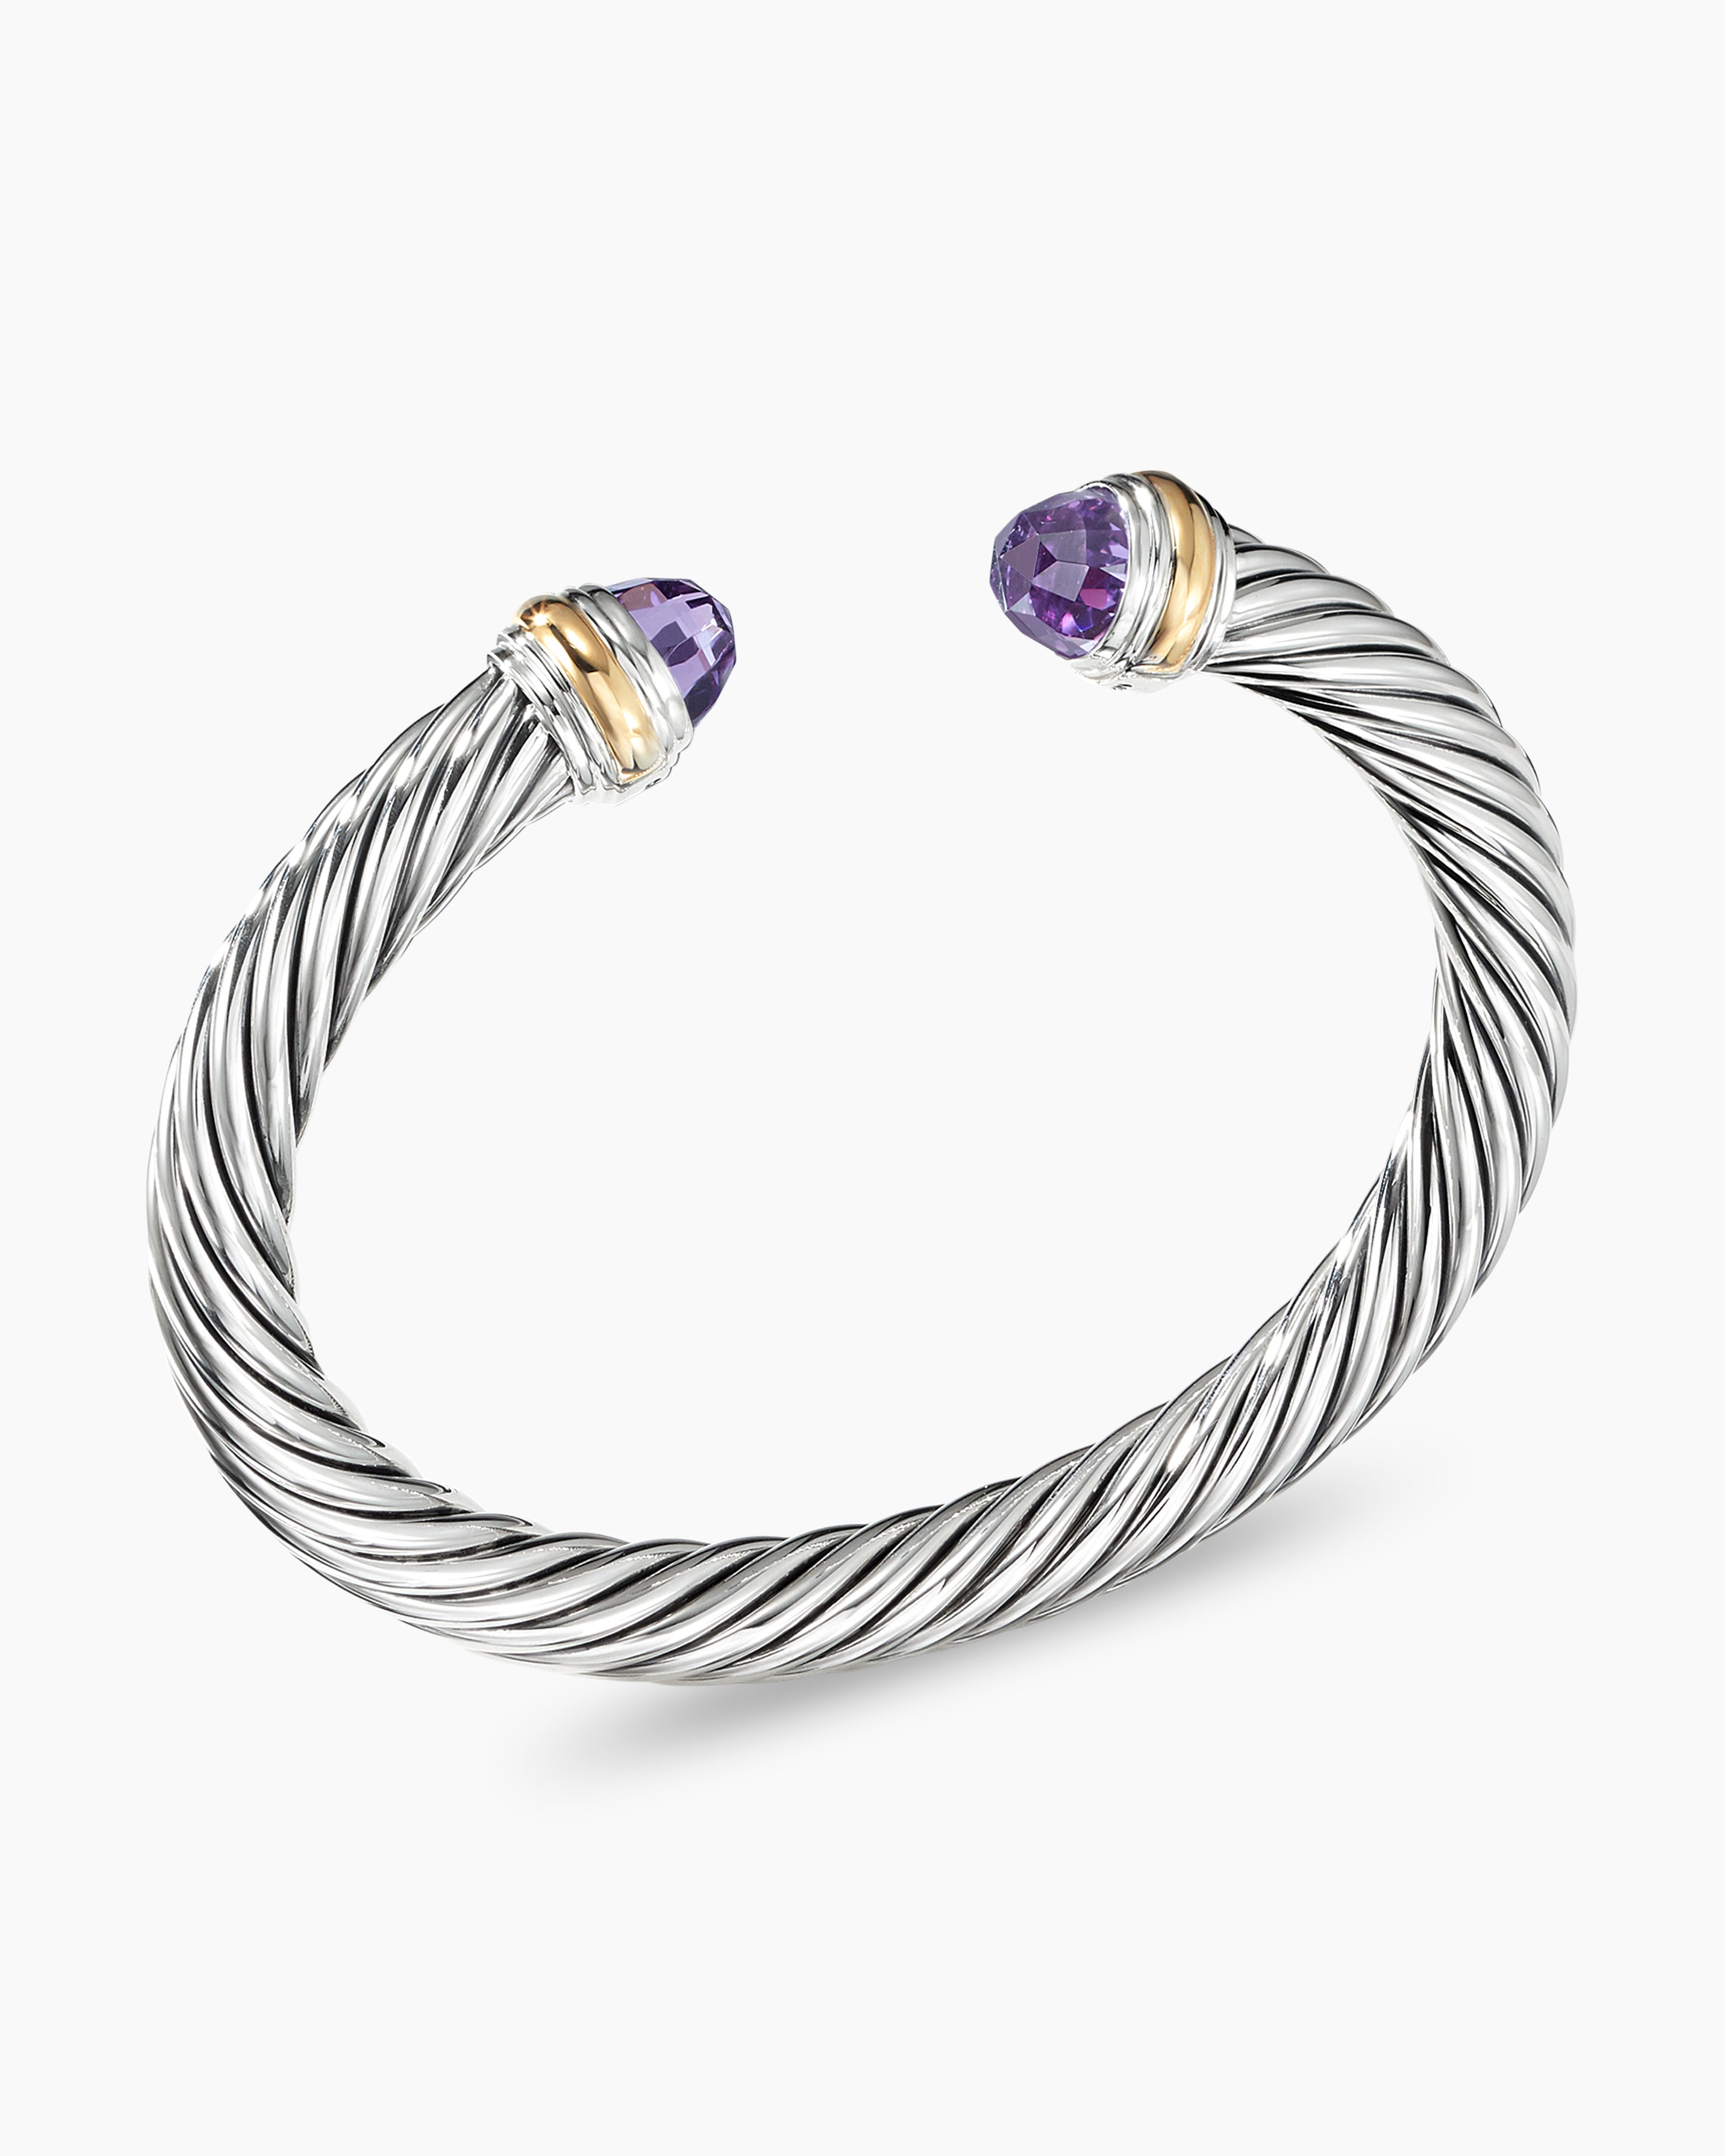 David Yurman Classic Cable Bracelet in Sterling Silver with 14K Yellow Gold and Amethyst, 7mm Women's Size Large